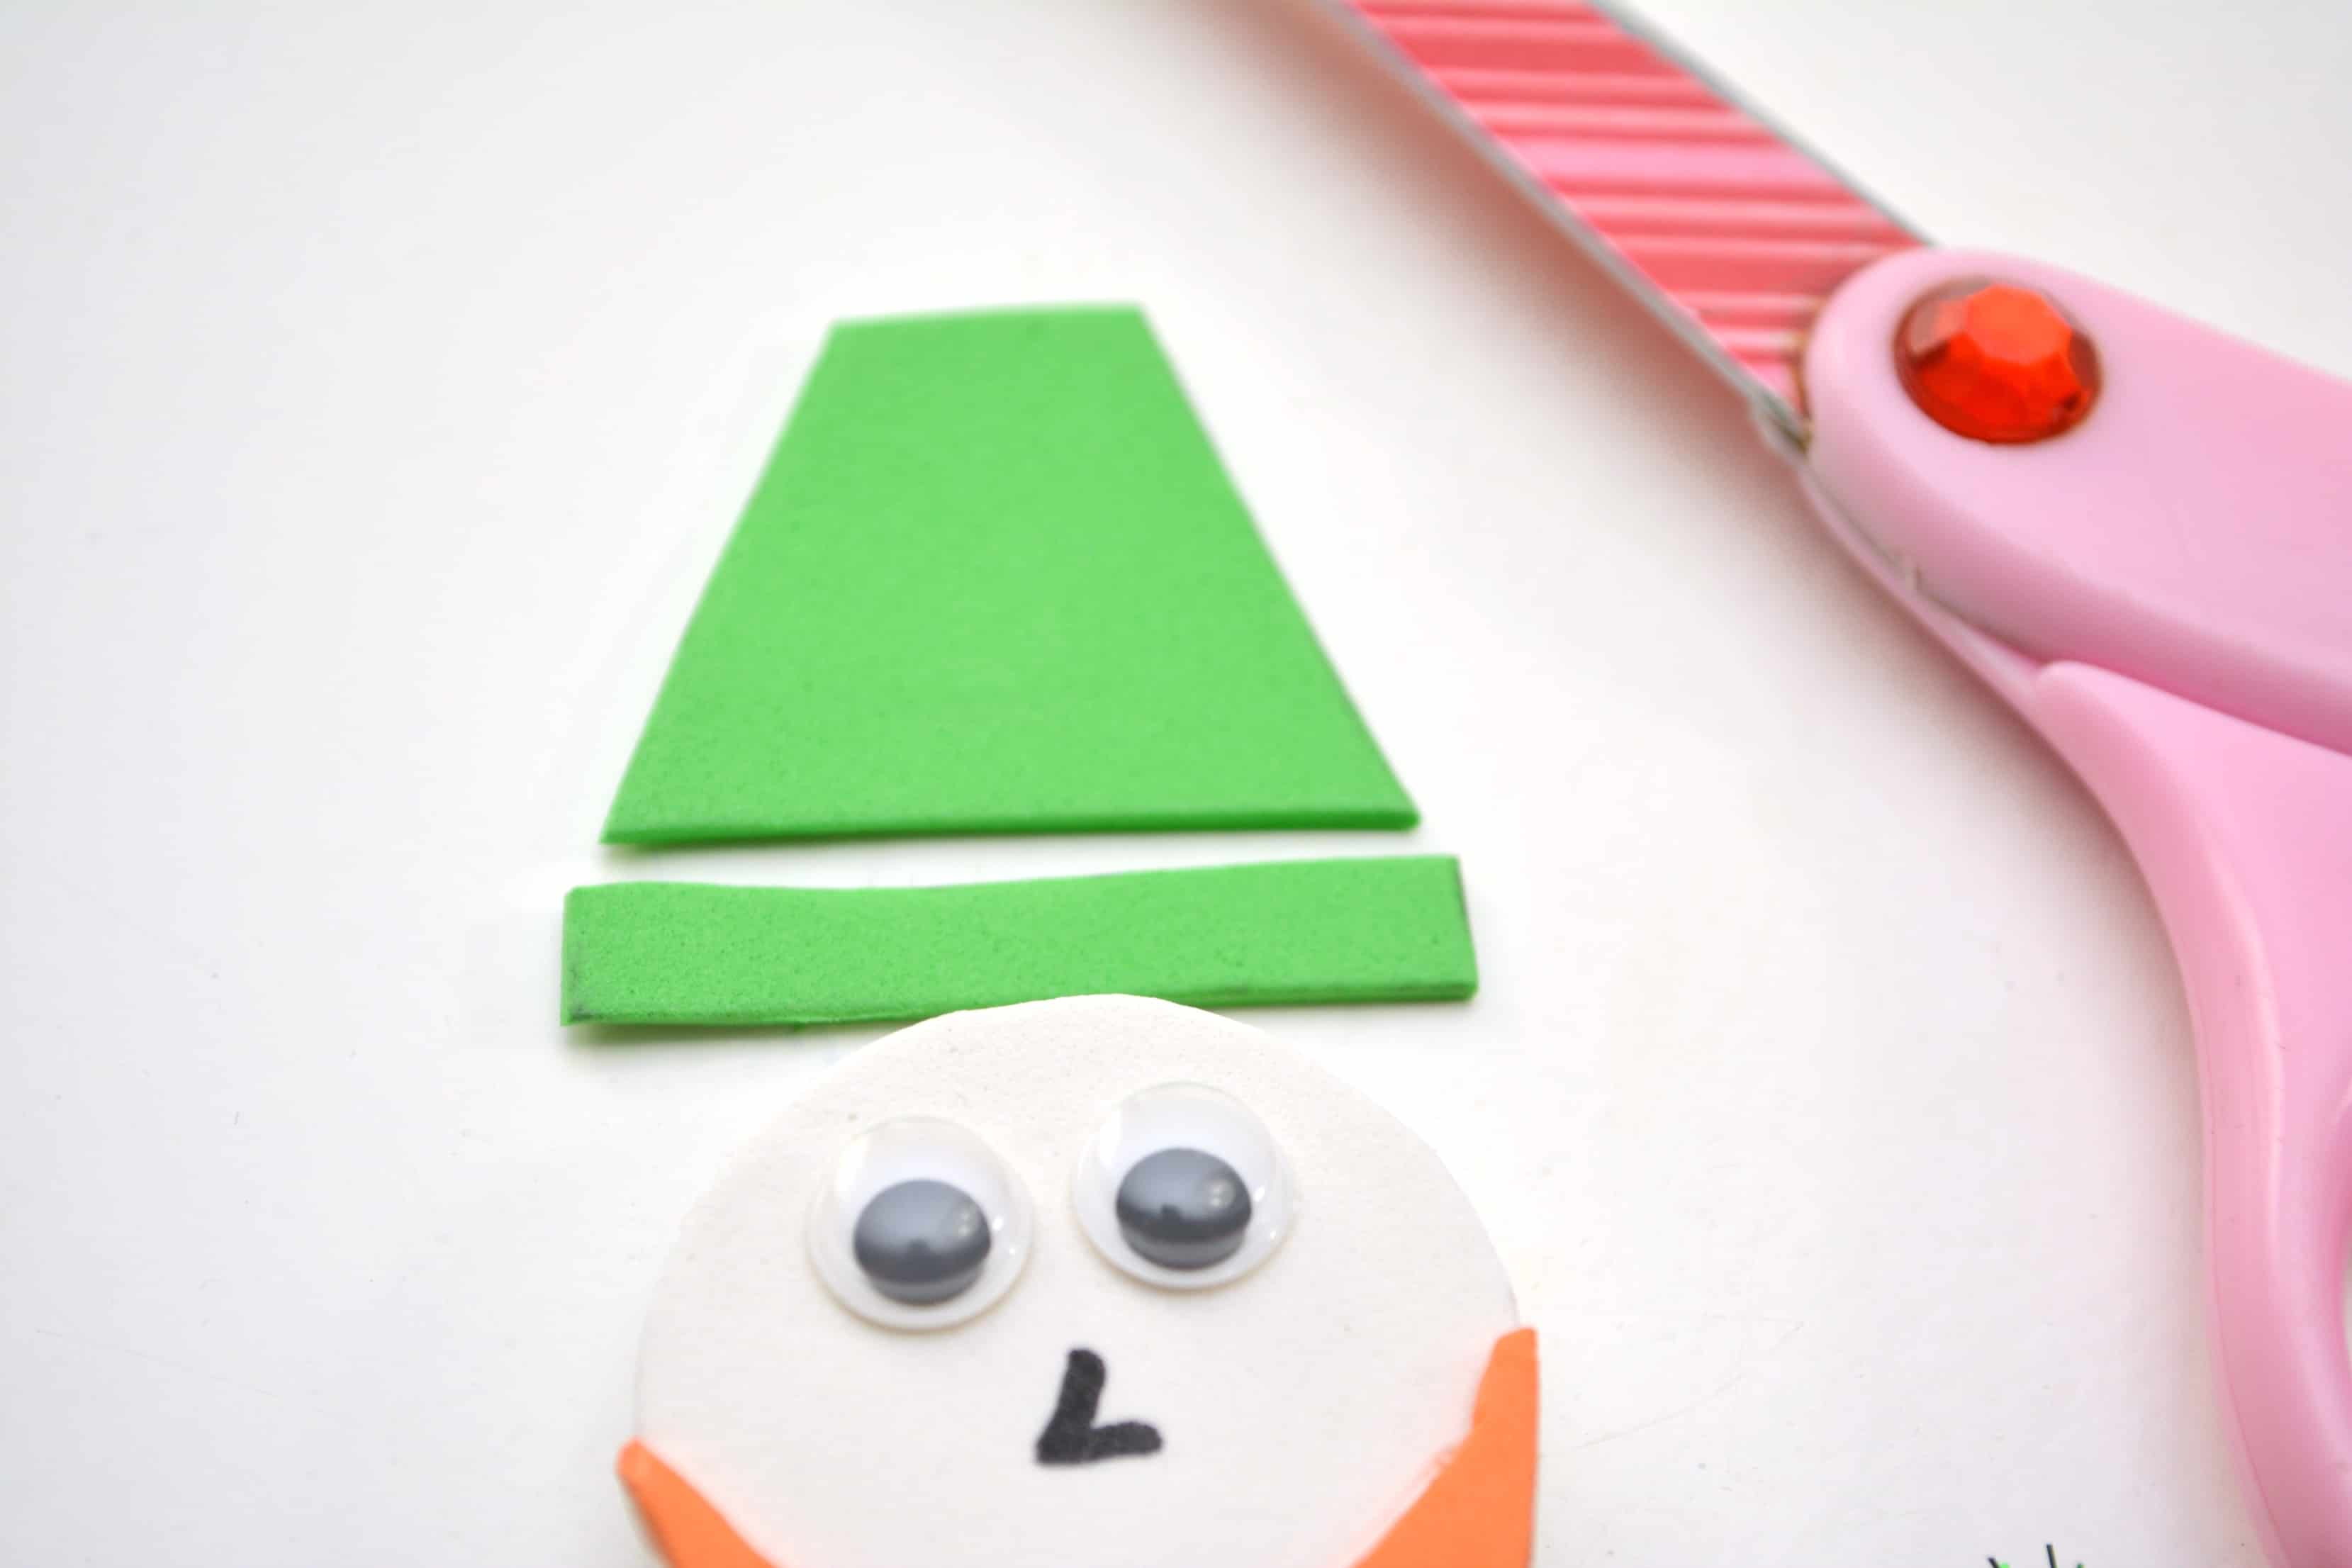 As St. Patrick's Day is in the corner, today I would like to share a very cute popsicle stick Leprechaun craft for you to have some fun with children welcoming St. Patrick's Day. This adorable craft is great to display around. You might also make some variation out of it.